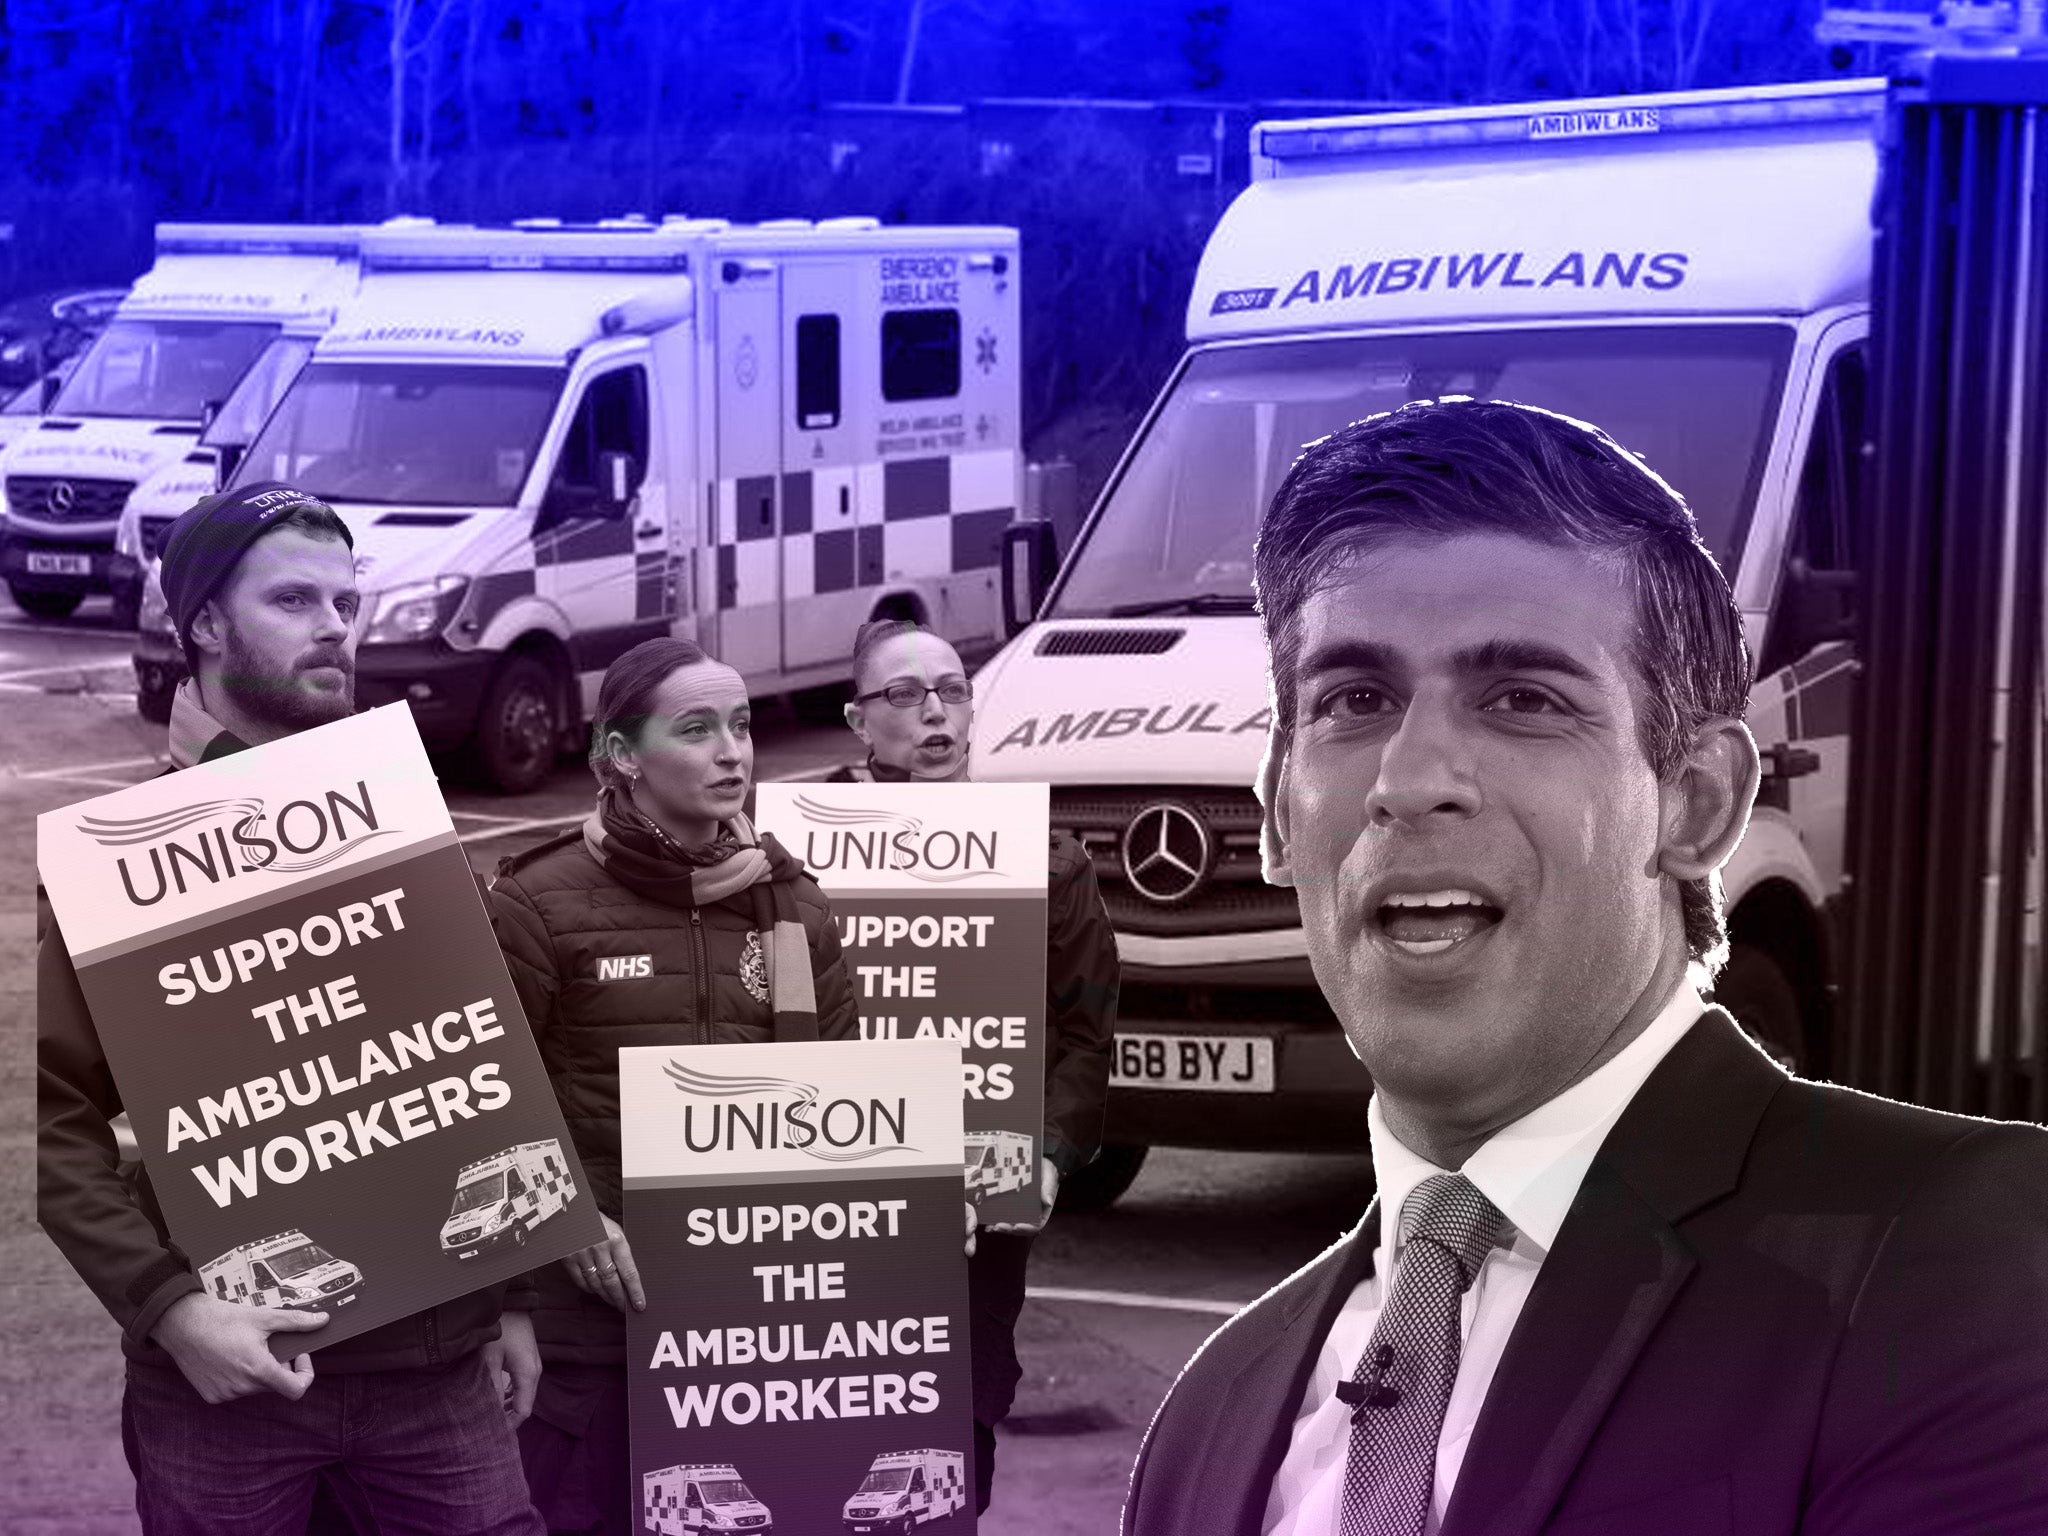 The prime minister Rishi Sunak has previously refused to back down on pay increase demands from striking health workers